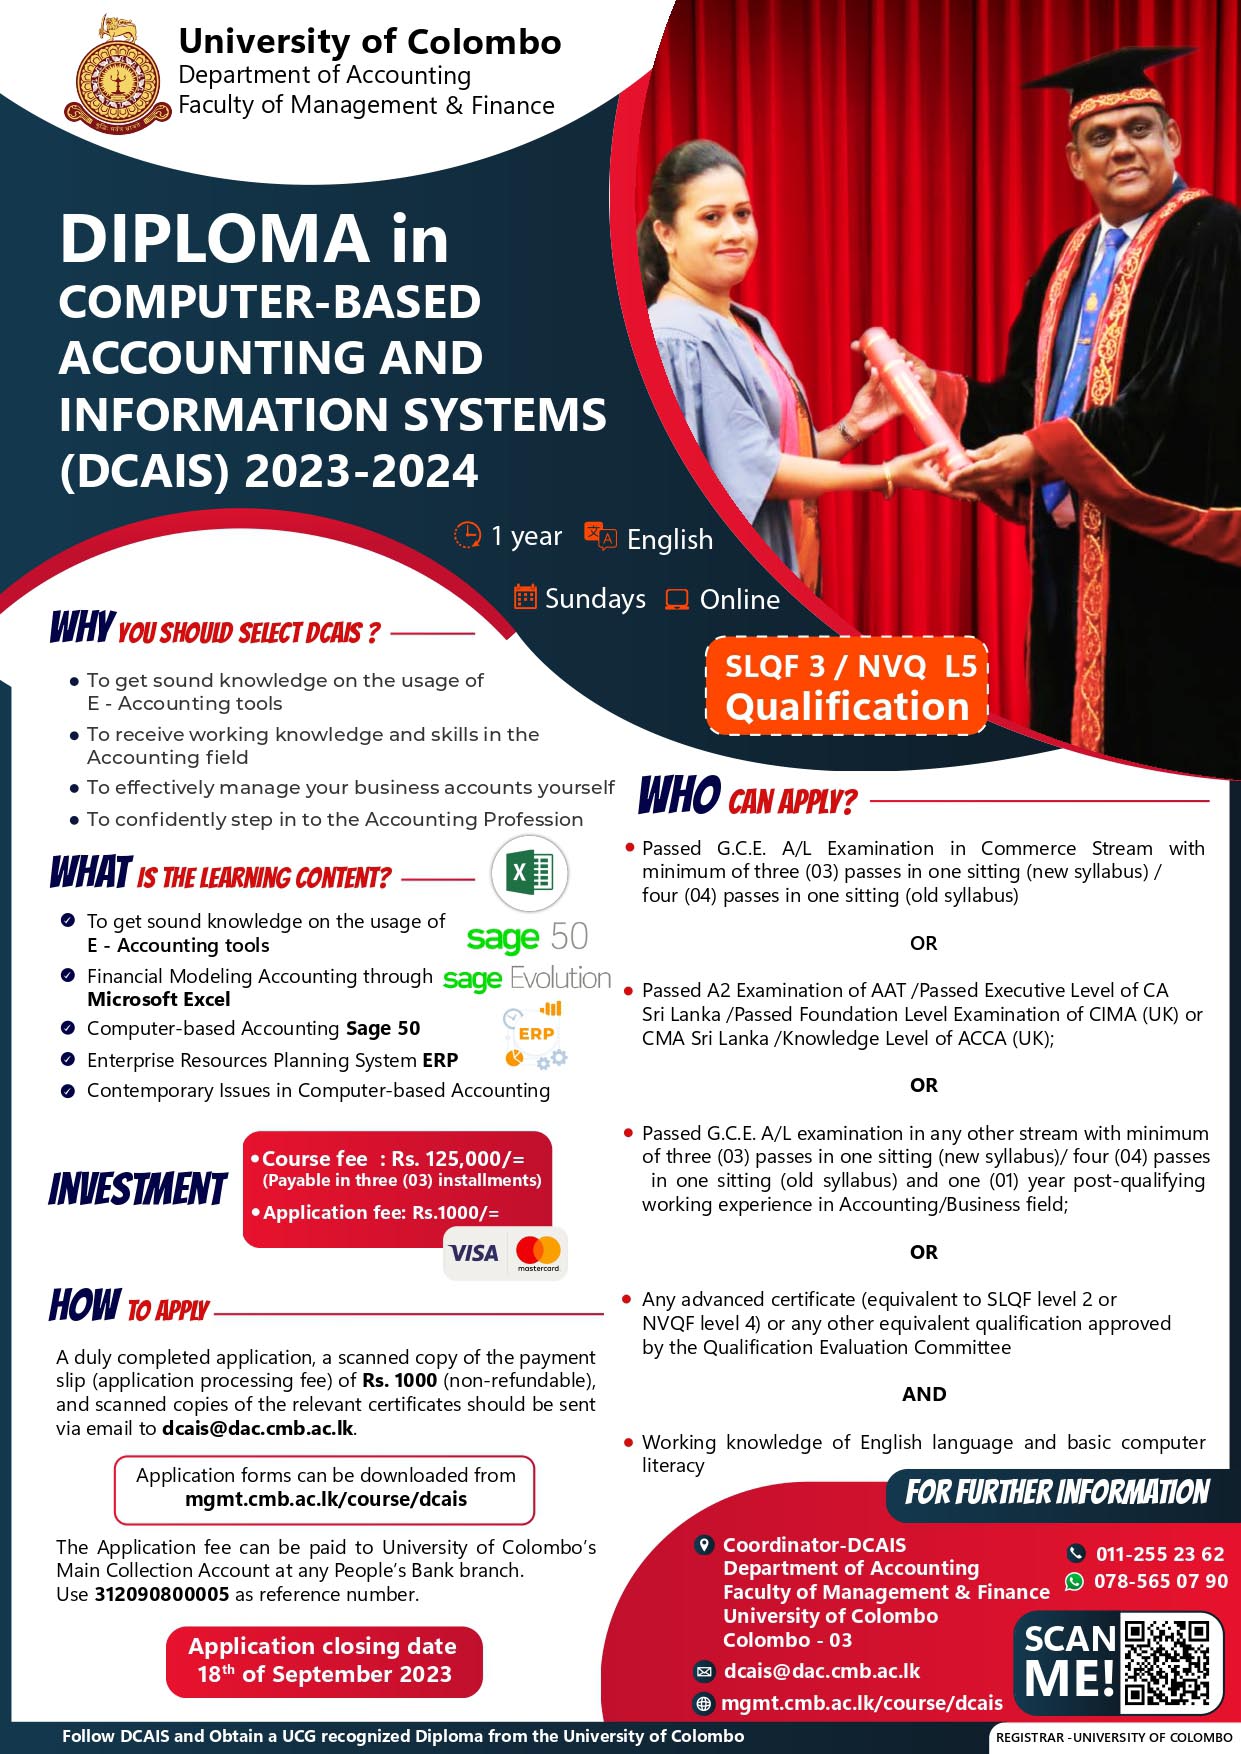 Diploma in Computer-based Accounting & Information Systems (DCAIS) 2023/24 – University of Colombo